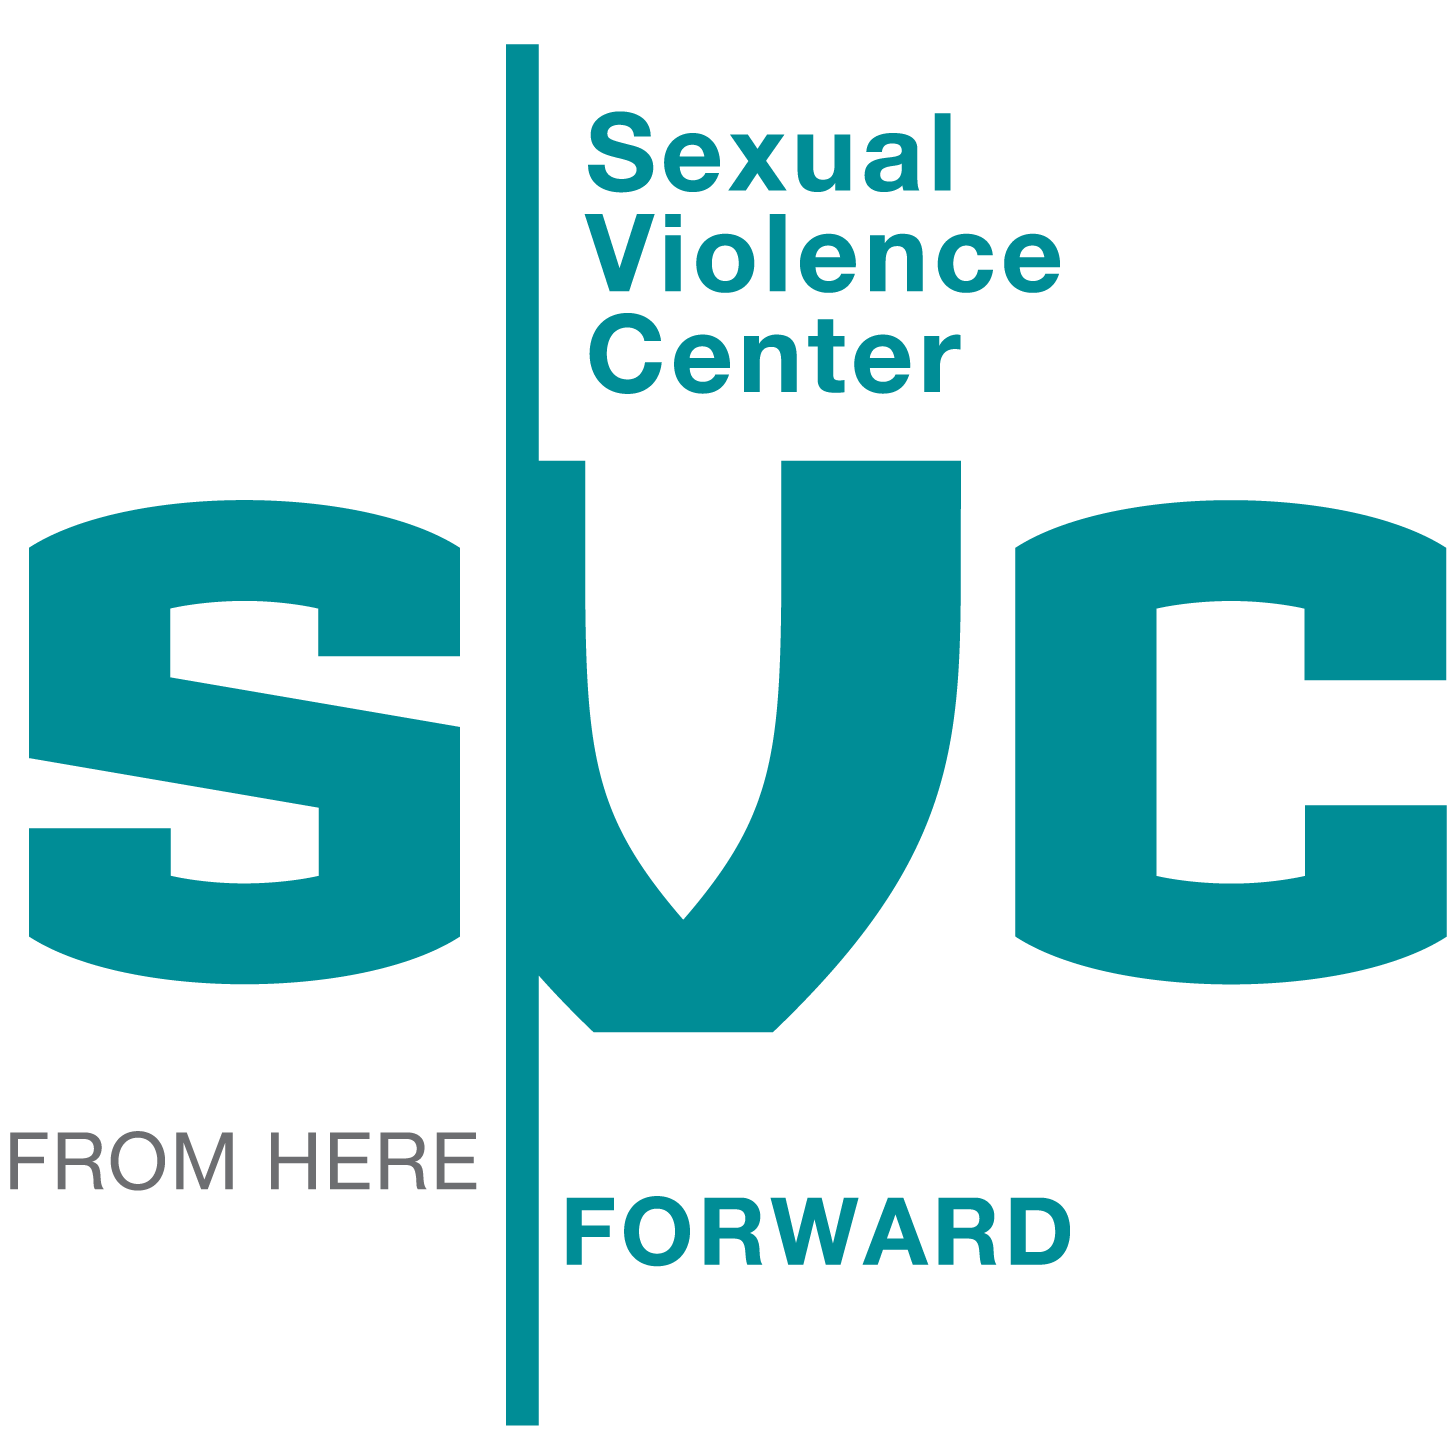 Sexual Violence Center